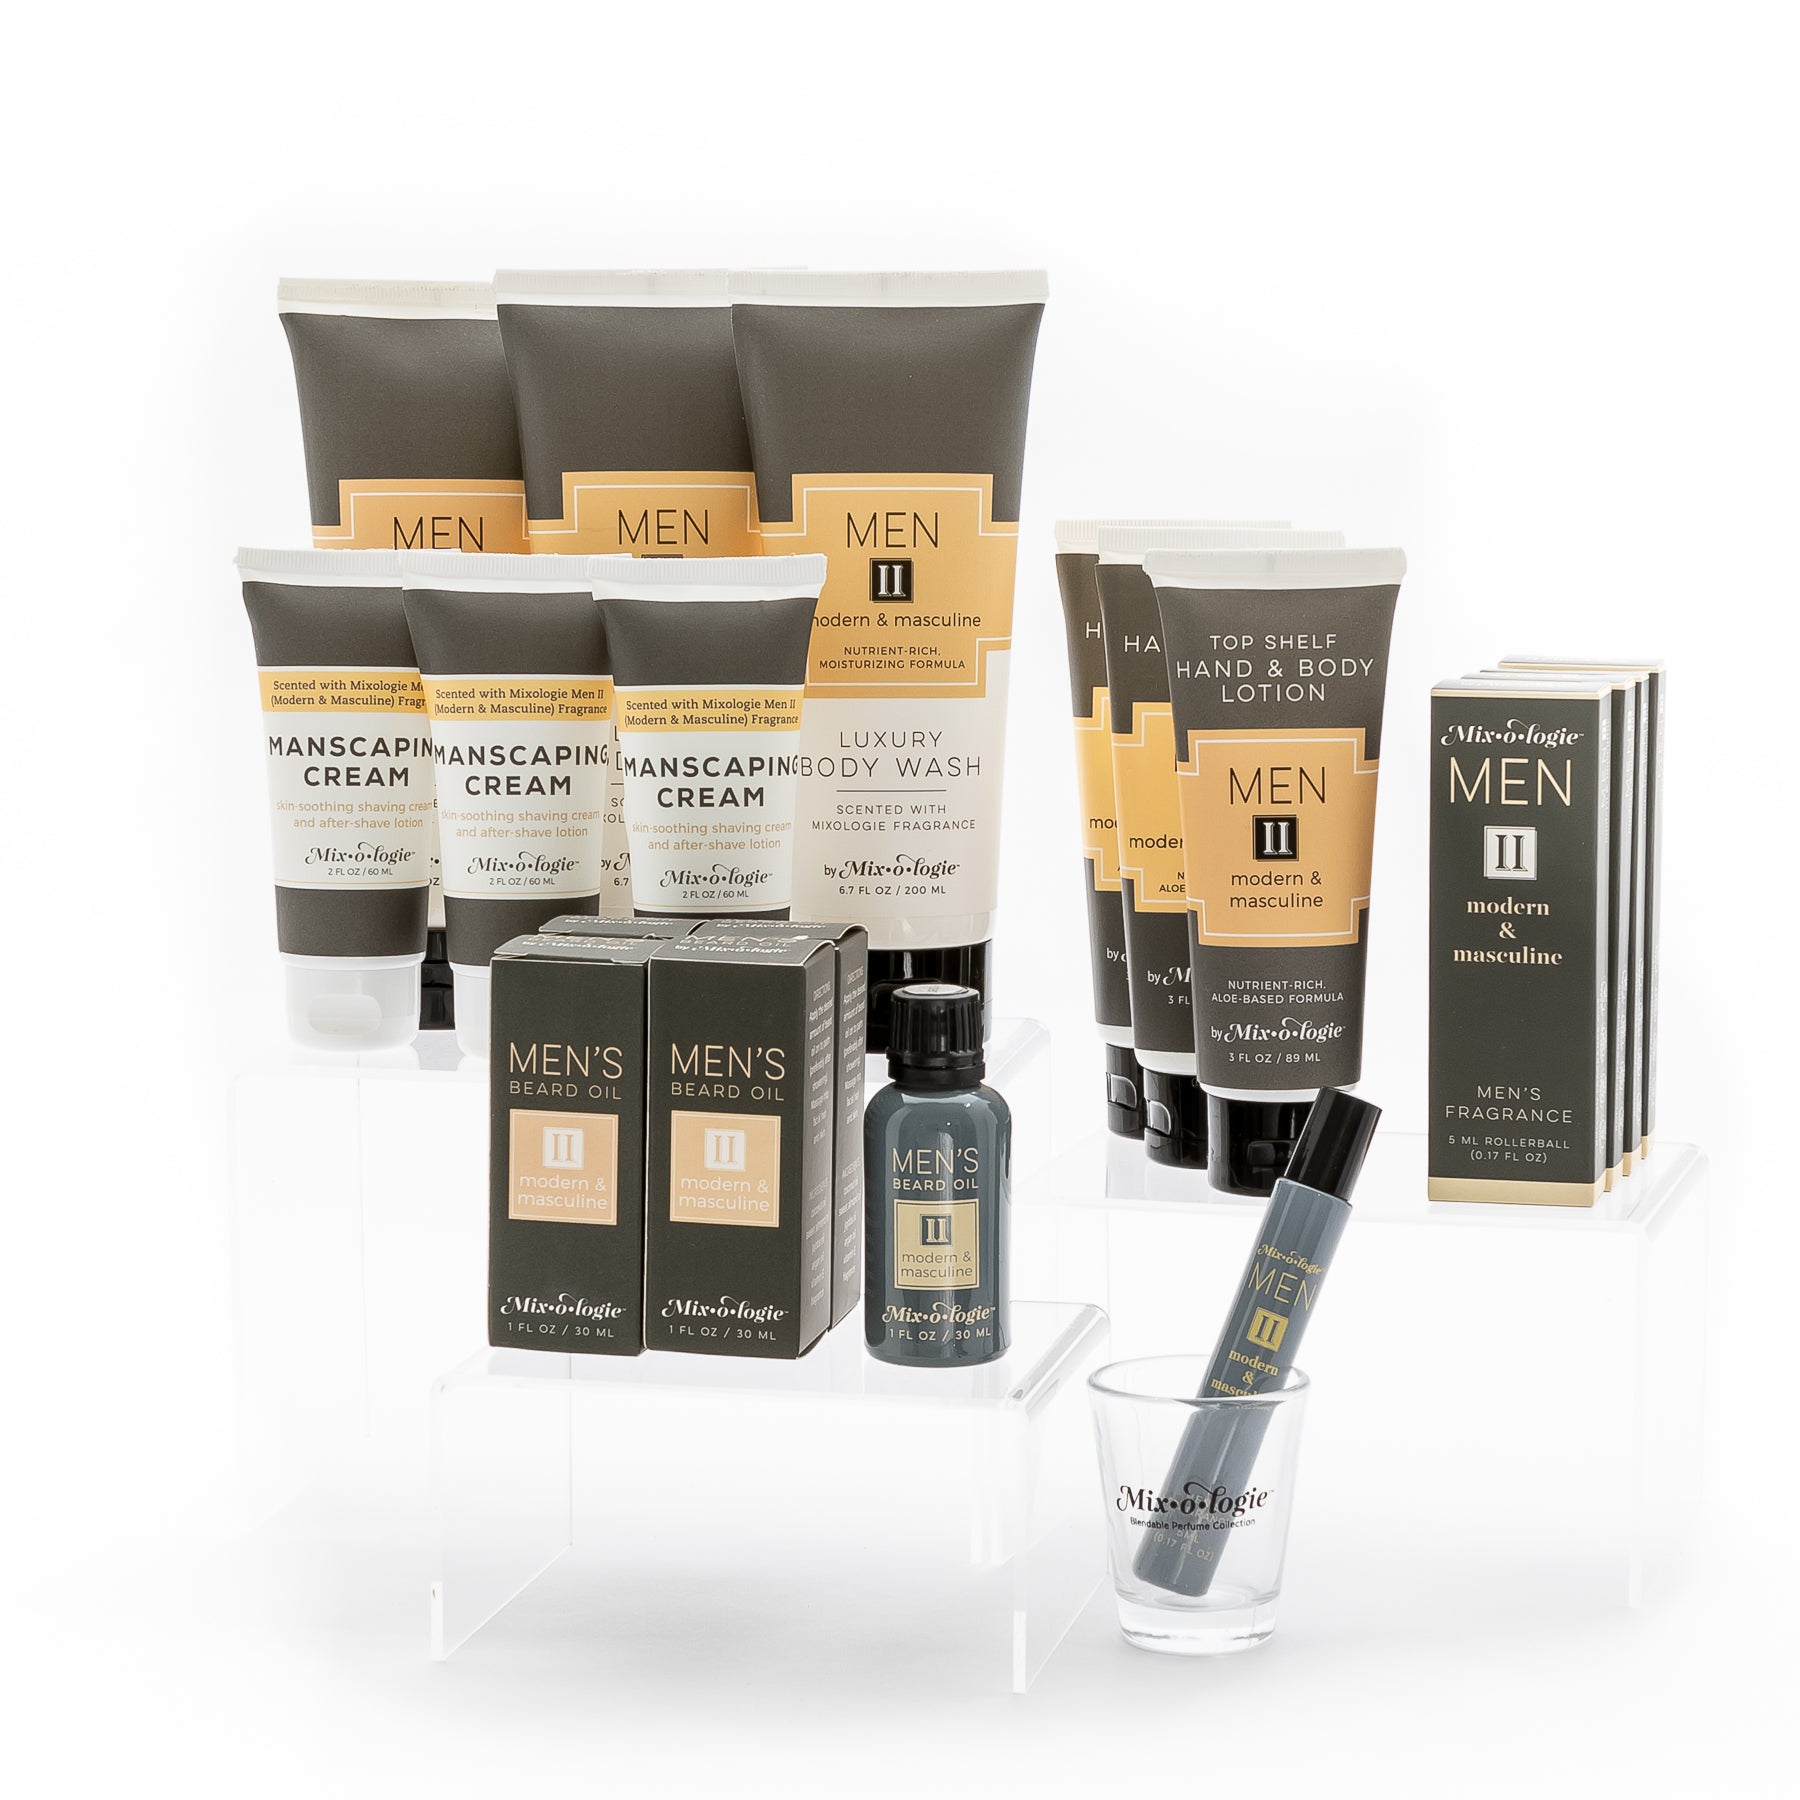 Men’s Featured Scent Collection Pre-Pack